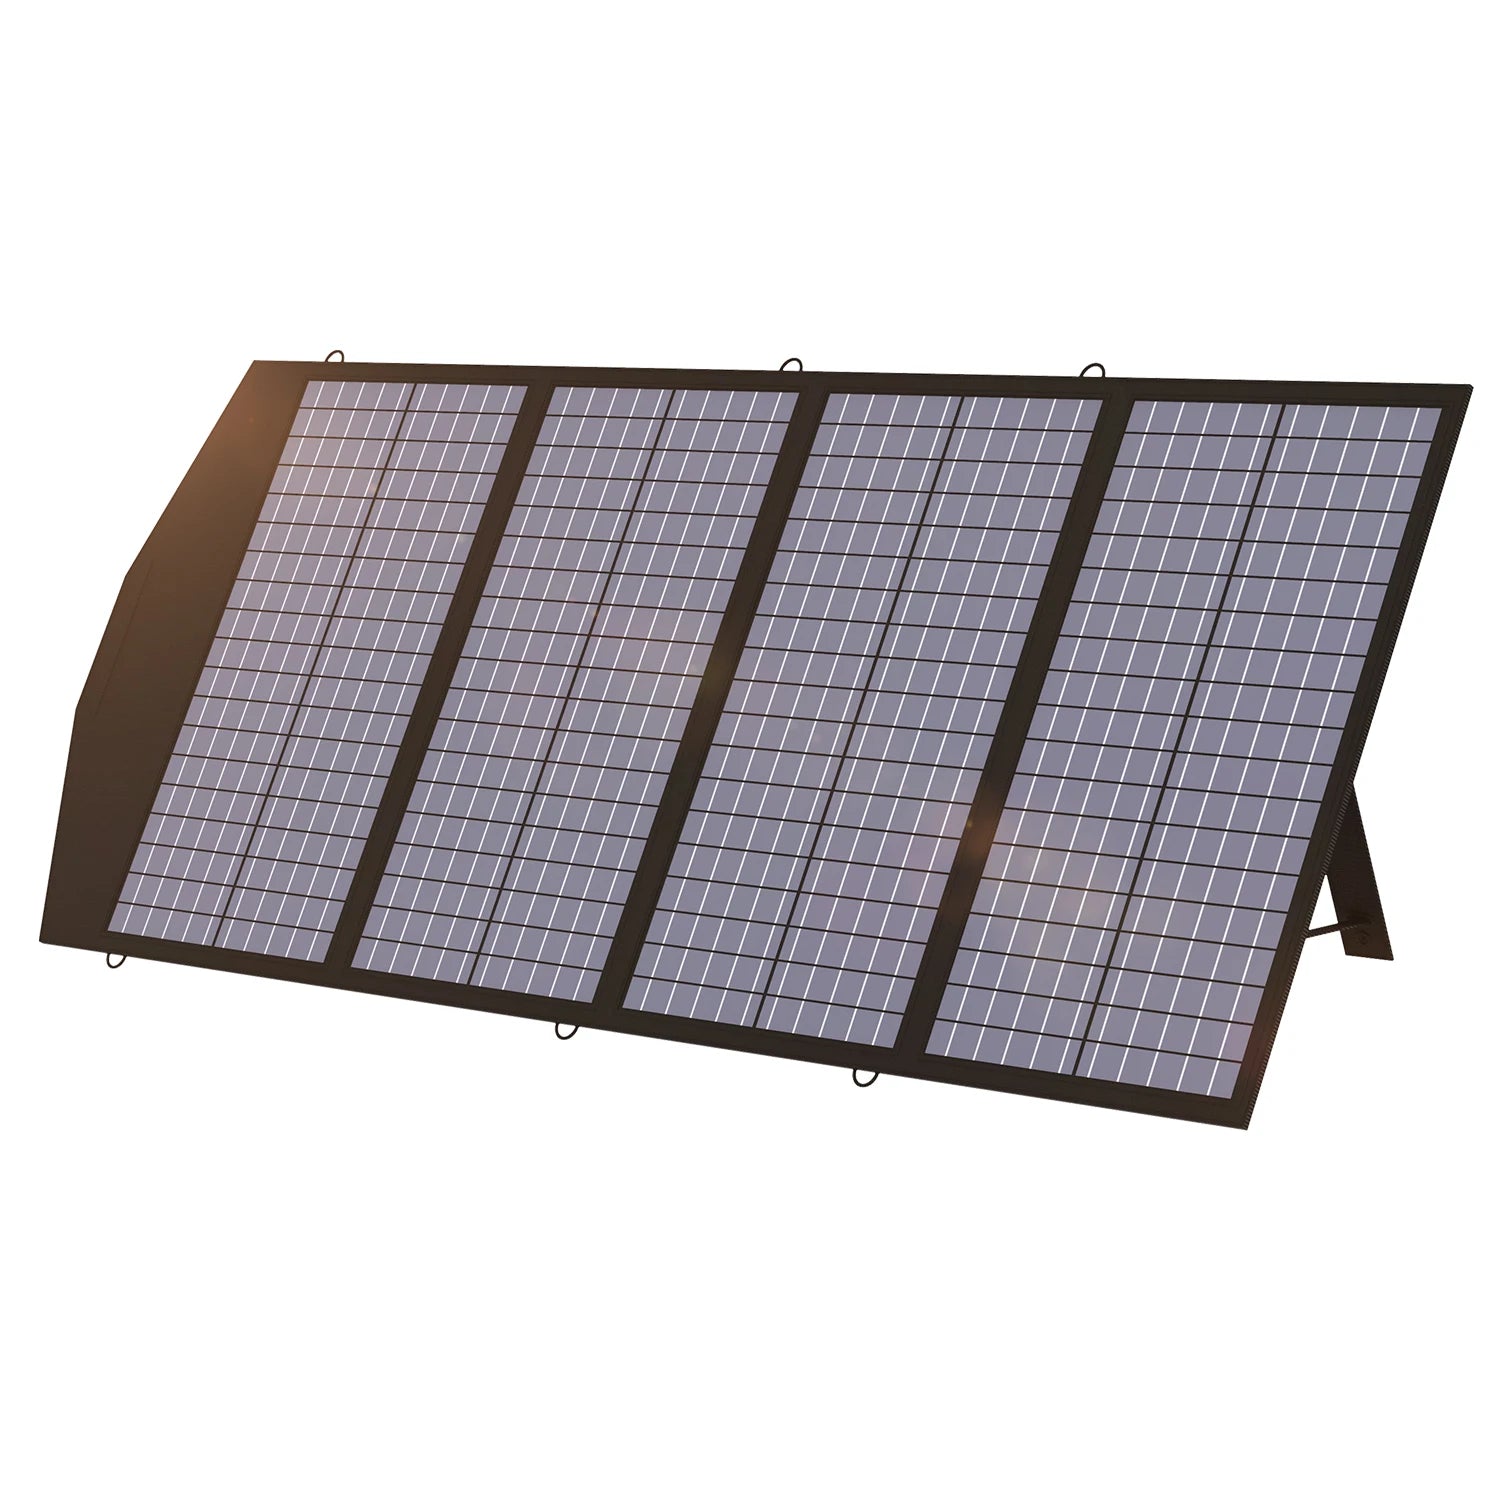 ALLPOWERS 18V Foldable Solar Panel, High-efficiency solar charger with US-made cells and foldable design for portable power.